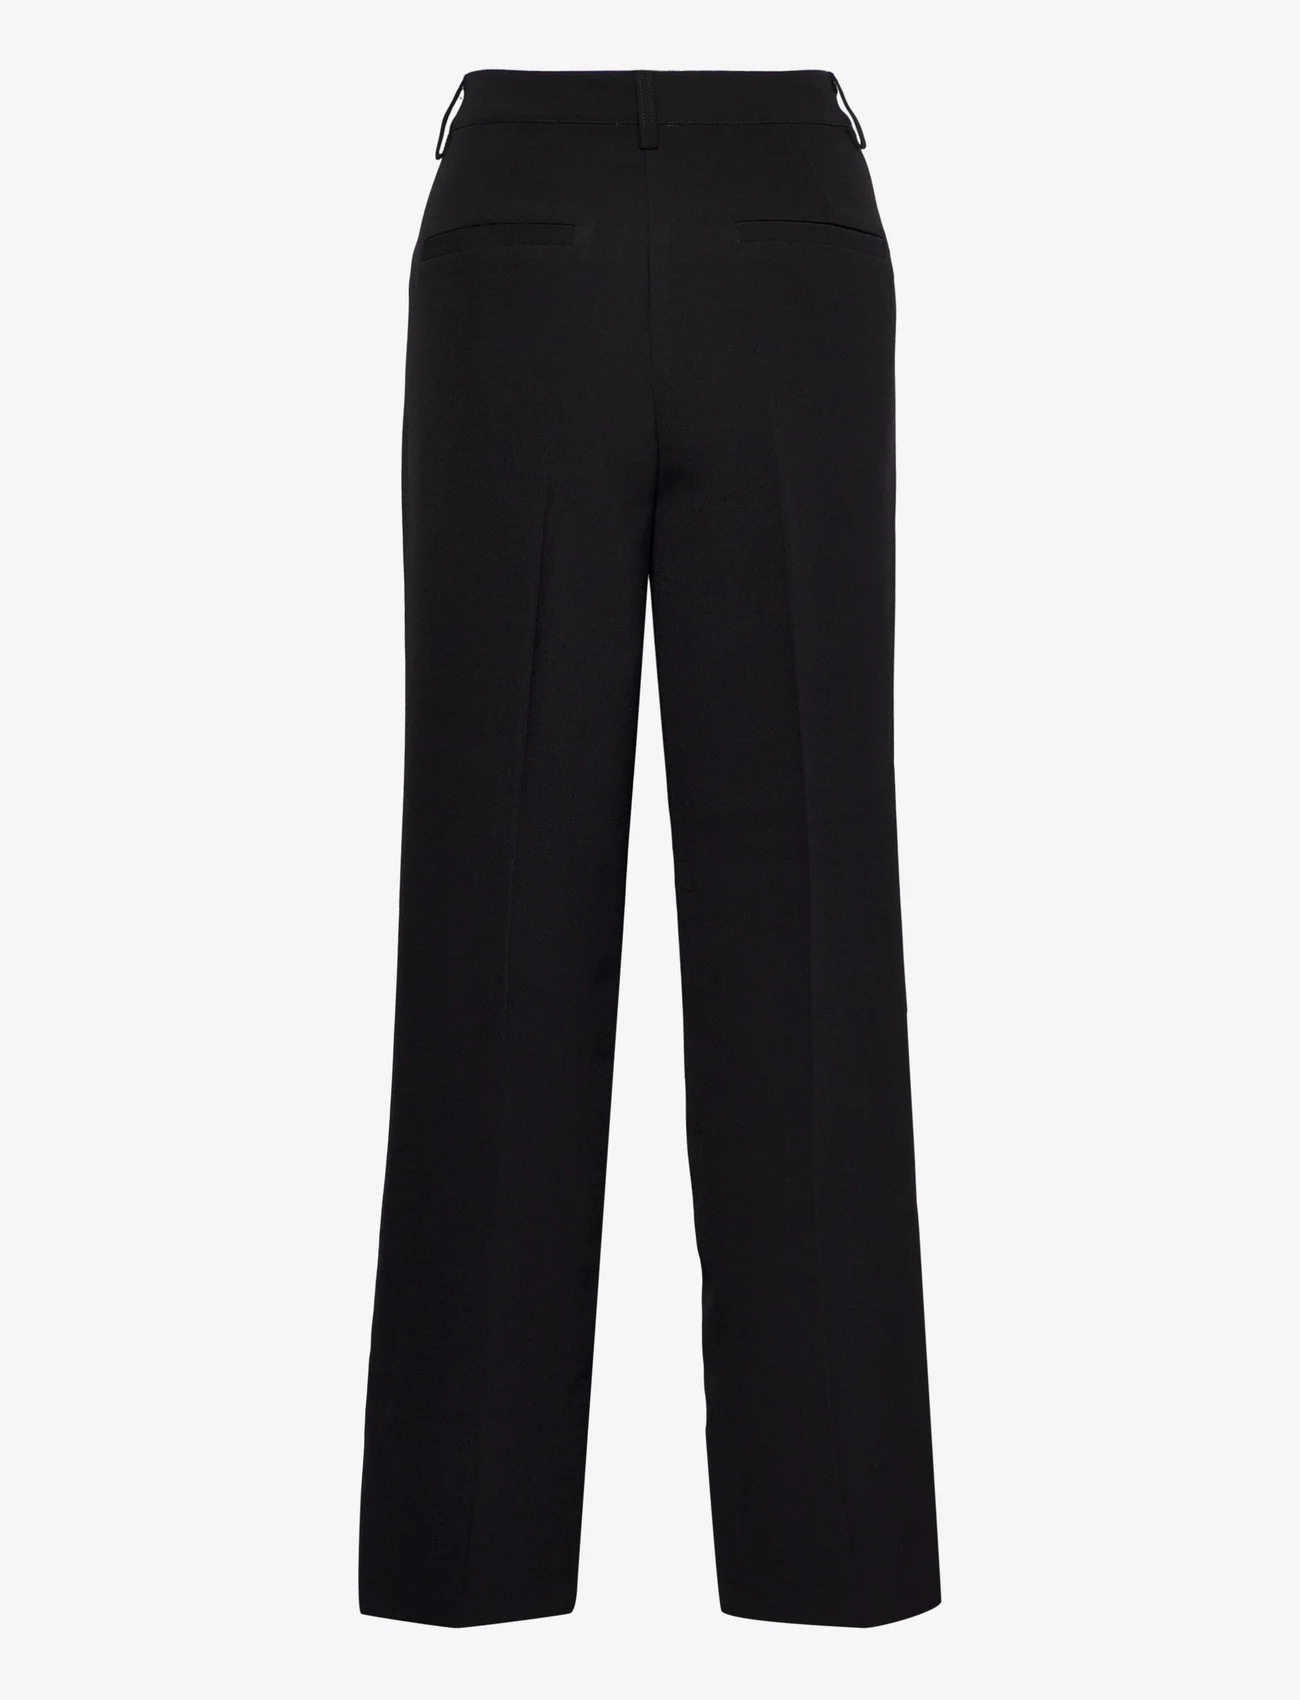 My Essential Wardrobe - 29 THE TAILORED PANT - tailored trousers - black - 1